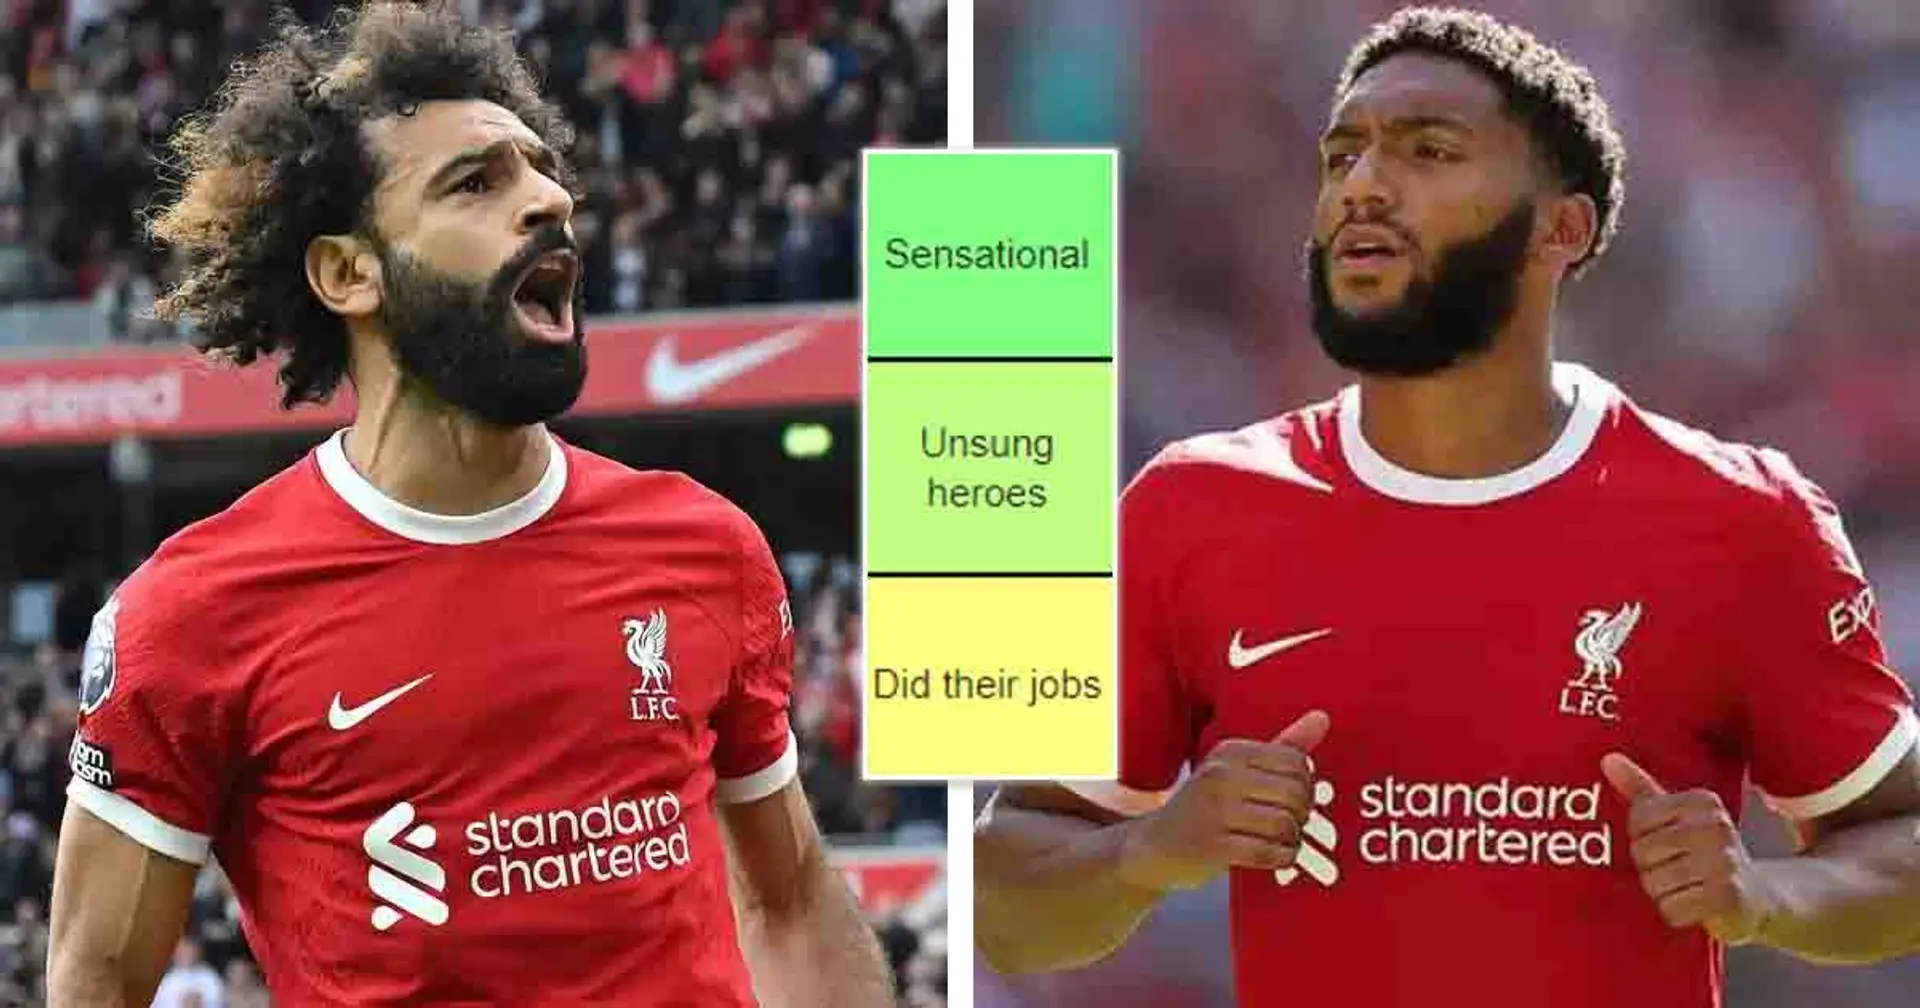 5 players sensational, 3 unsung heroes: Liverpool player performance tier list for West Ham thrashing